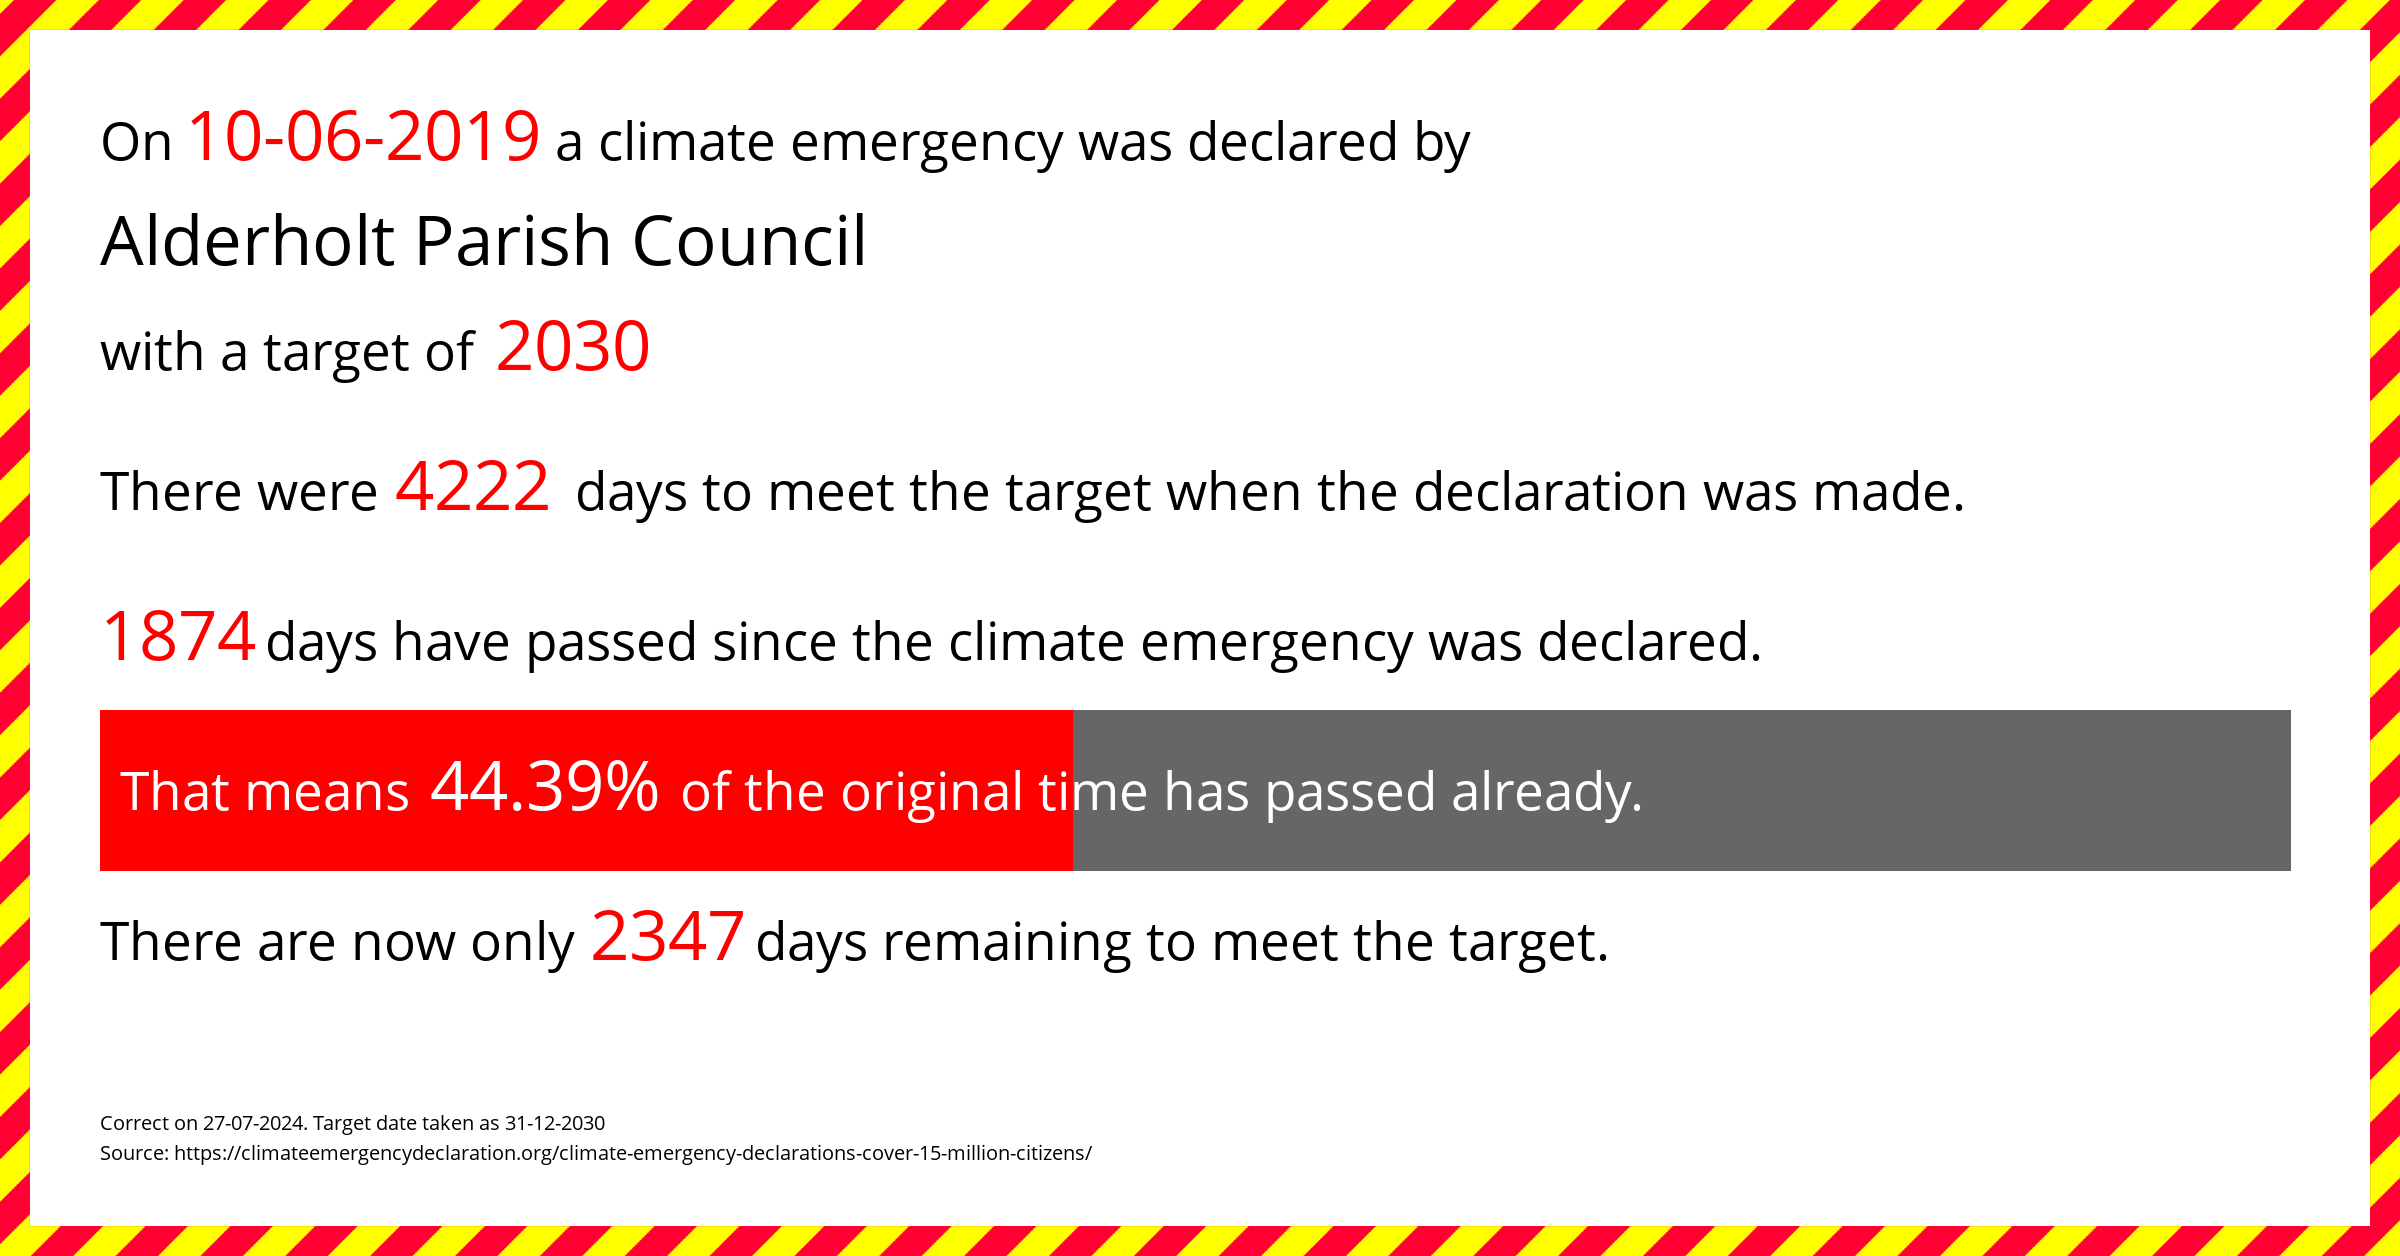 Alderholt Parish Council  declared a Climate emergency on Monday 10th June 2019, with a target of 2030.